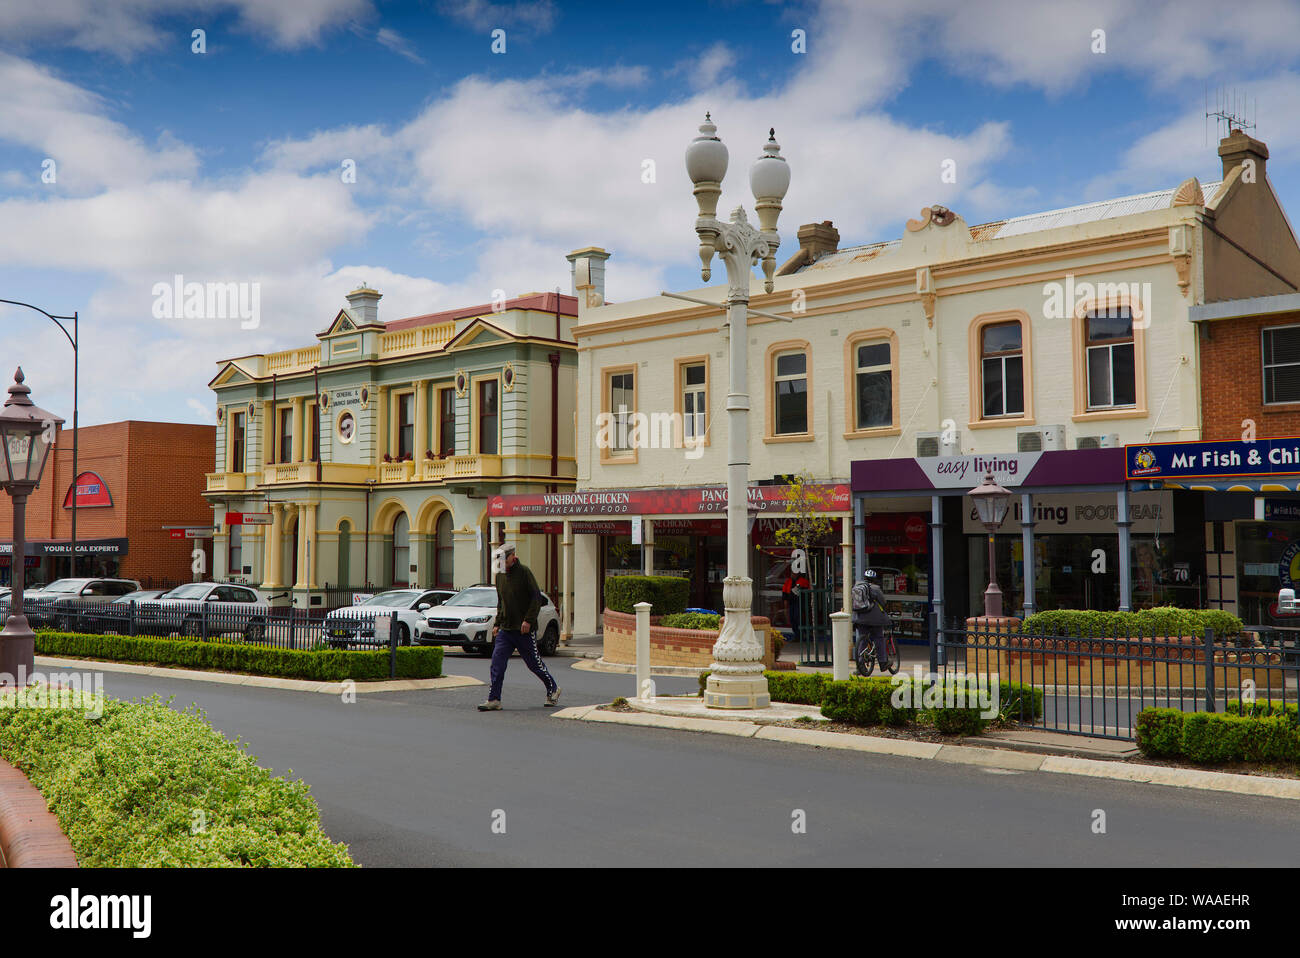 Historic streetscape complete with restored gas lamp street lighting Bathurst New South Wales Australia Stock Photo